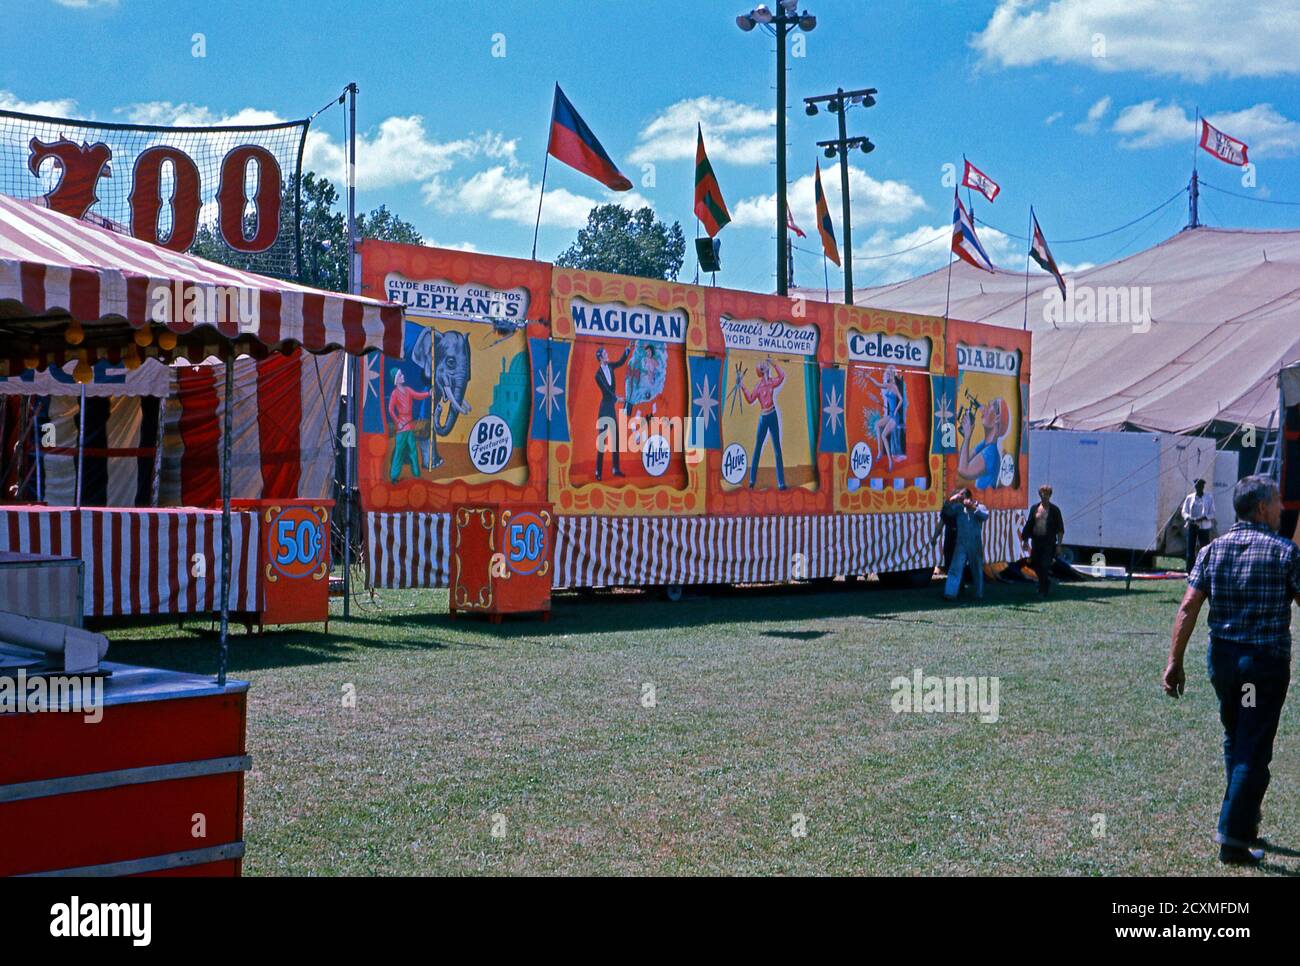 A vintage photograph of the sideshow alley at Clyde Beatty Cole Bros Brothers Combined Circus, USA c.1960. The hand-painted banners indicate that the attractions include elephants, a magician, Frances Doran (a sword swallower), Celeste and Diablo (probably a fire eater). The painted advertising material is now considered to be folk art. This image is from an old American amateur Kodak colour transparency. Stock Photo